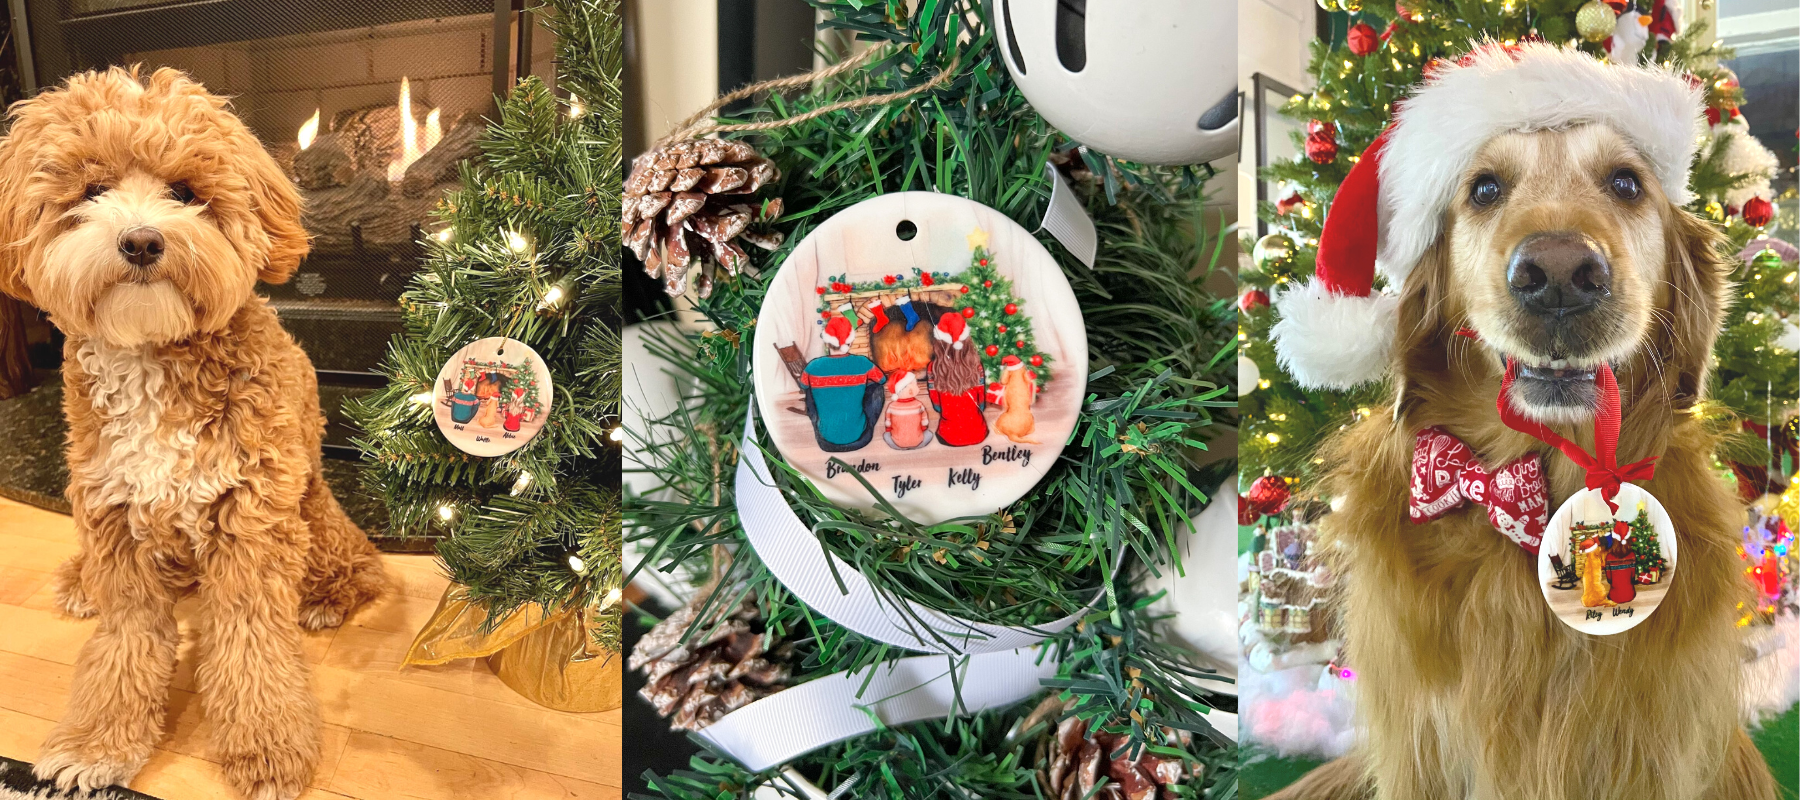 14 Unique Christmas Ornaments For Dogs and Dog Lovers To Adorn Christmas Tree